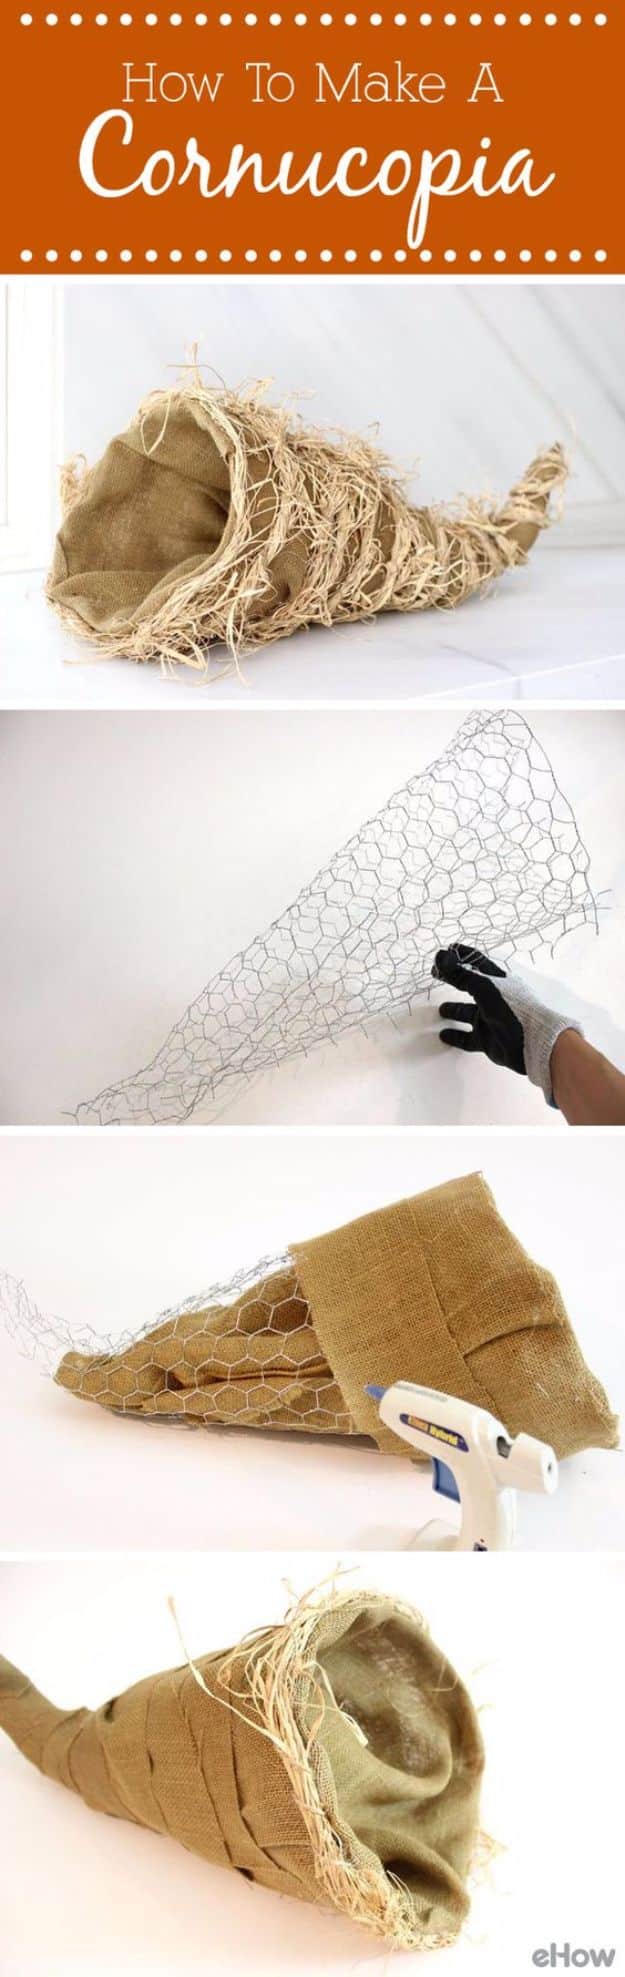 diy ideas chicken wire crafts -Chicken Wire Cornucopia - Rustic Farmhouse Decor Tutorials With Chickenwire and Easy Vintage Shabby Chic Home Decor for Kitchen, Living Room and Bathroom - Creative Country Crafts #diy #crafts